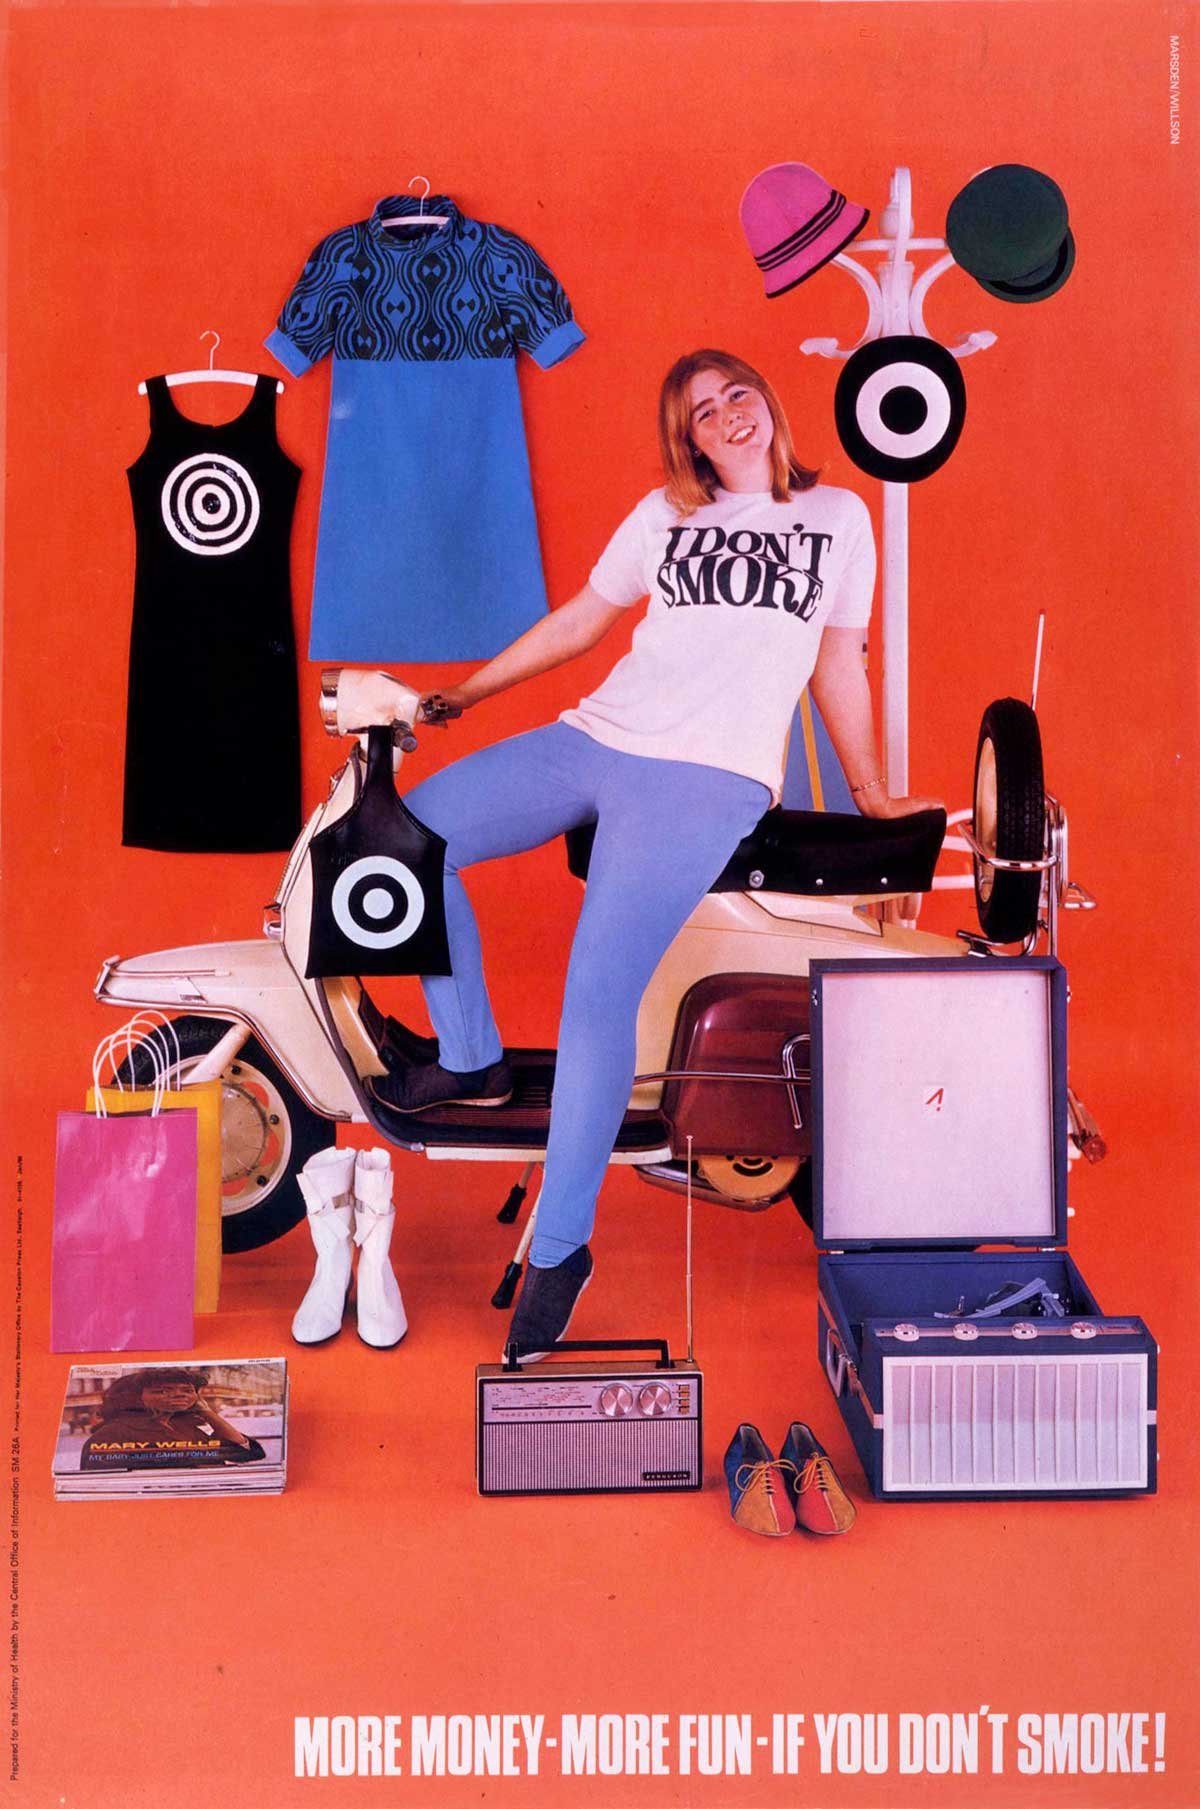 The words 'MORE MONEY-MORE FUN-IF YOU DON'T SMOKE!' below a woman surrounded by desirable goods.